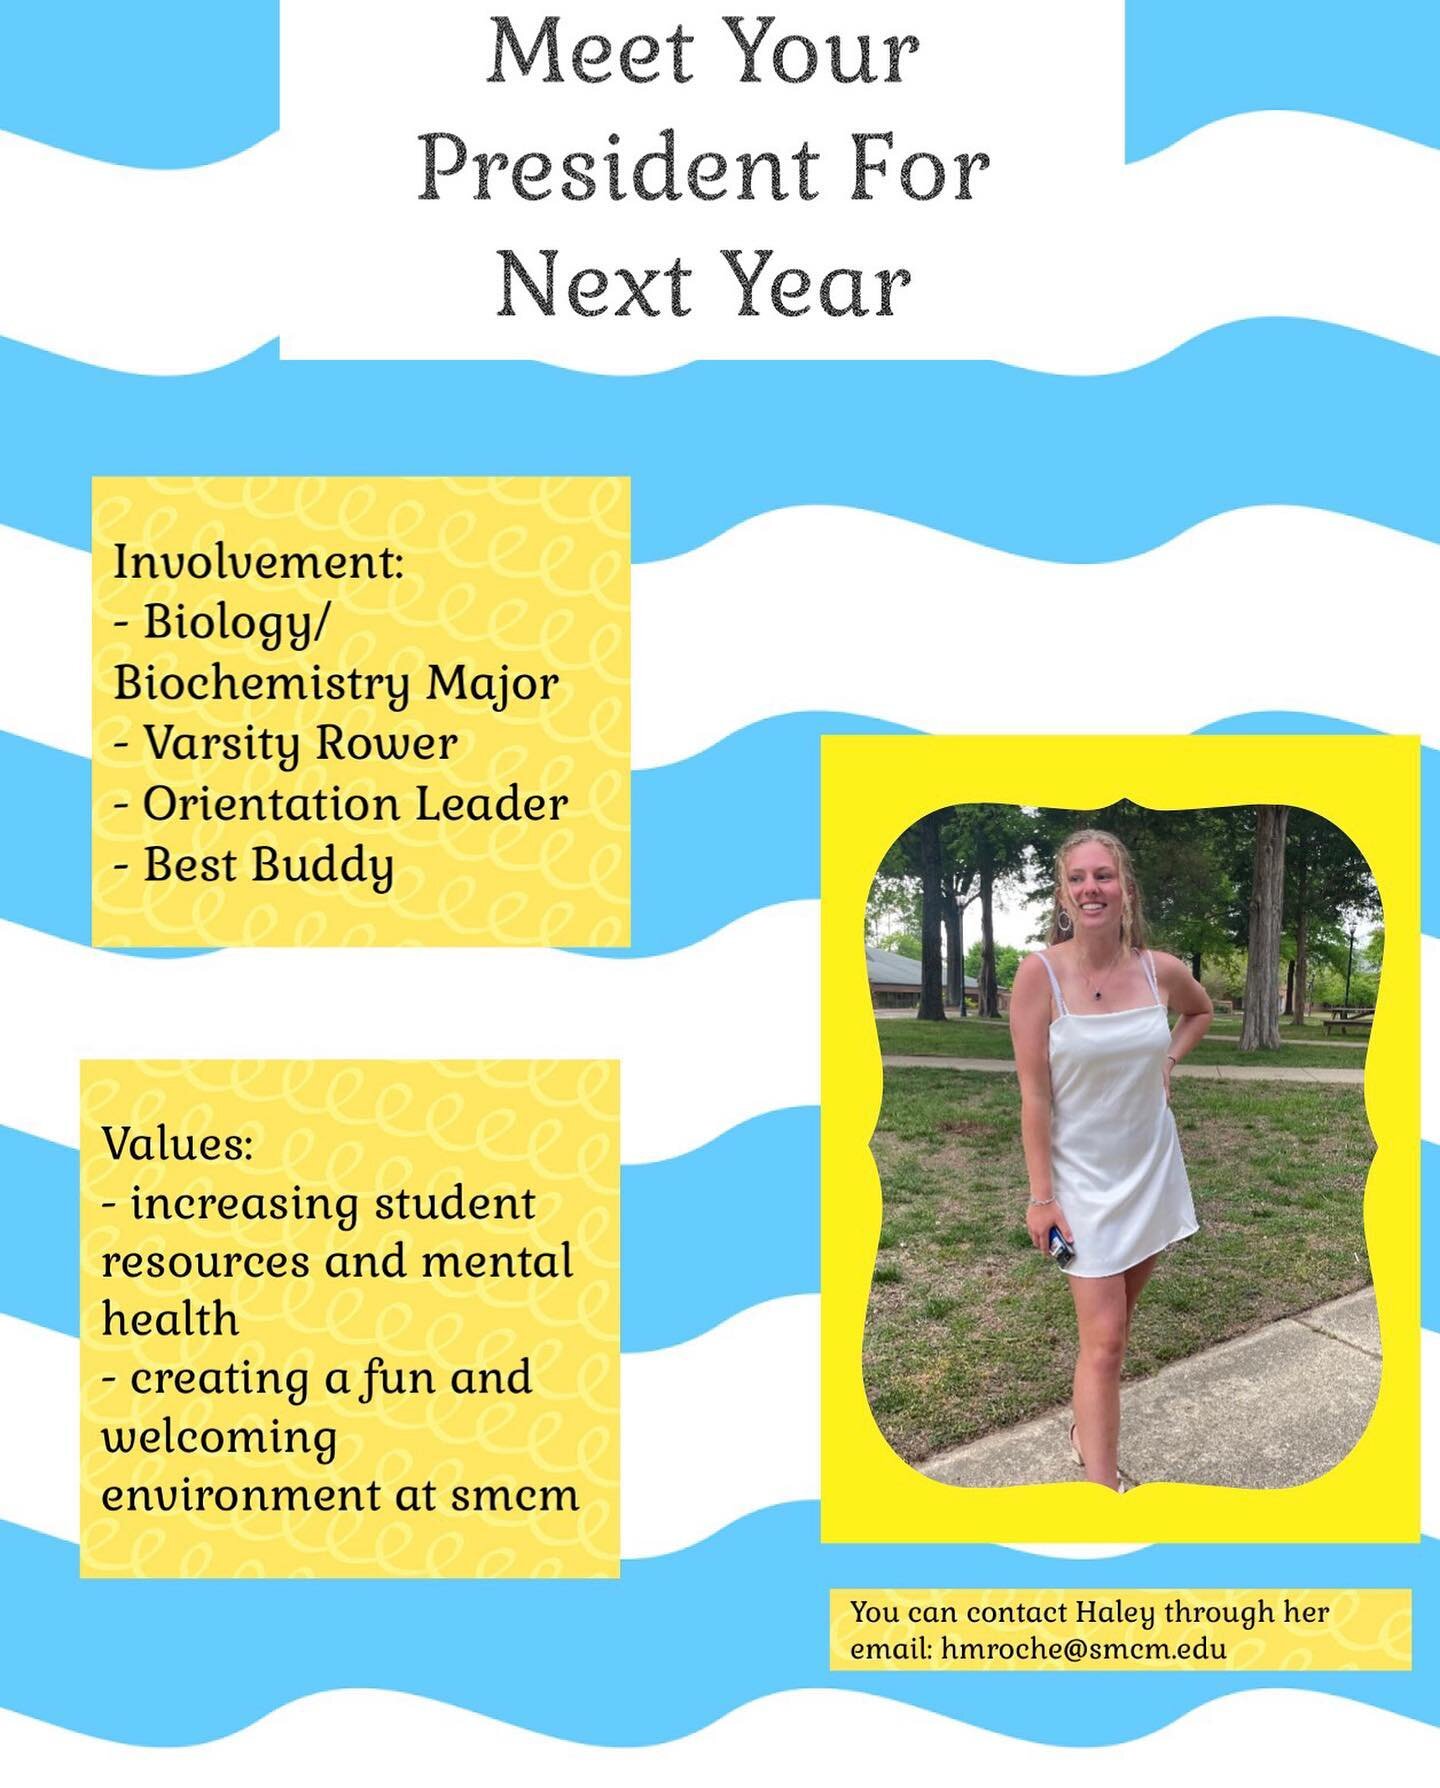 Meet your president for next year! When Haley&rsquo;s not off rowing or studying biology, she loves watching the sunset in her hammock in the many beautiful locations about campus!! She is very excited to put in a lot of hard work for the class of 20